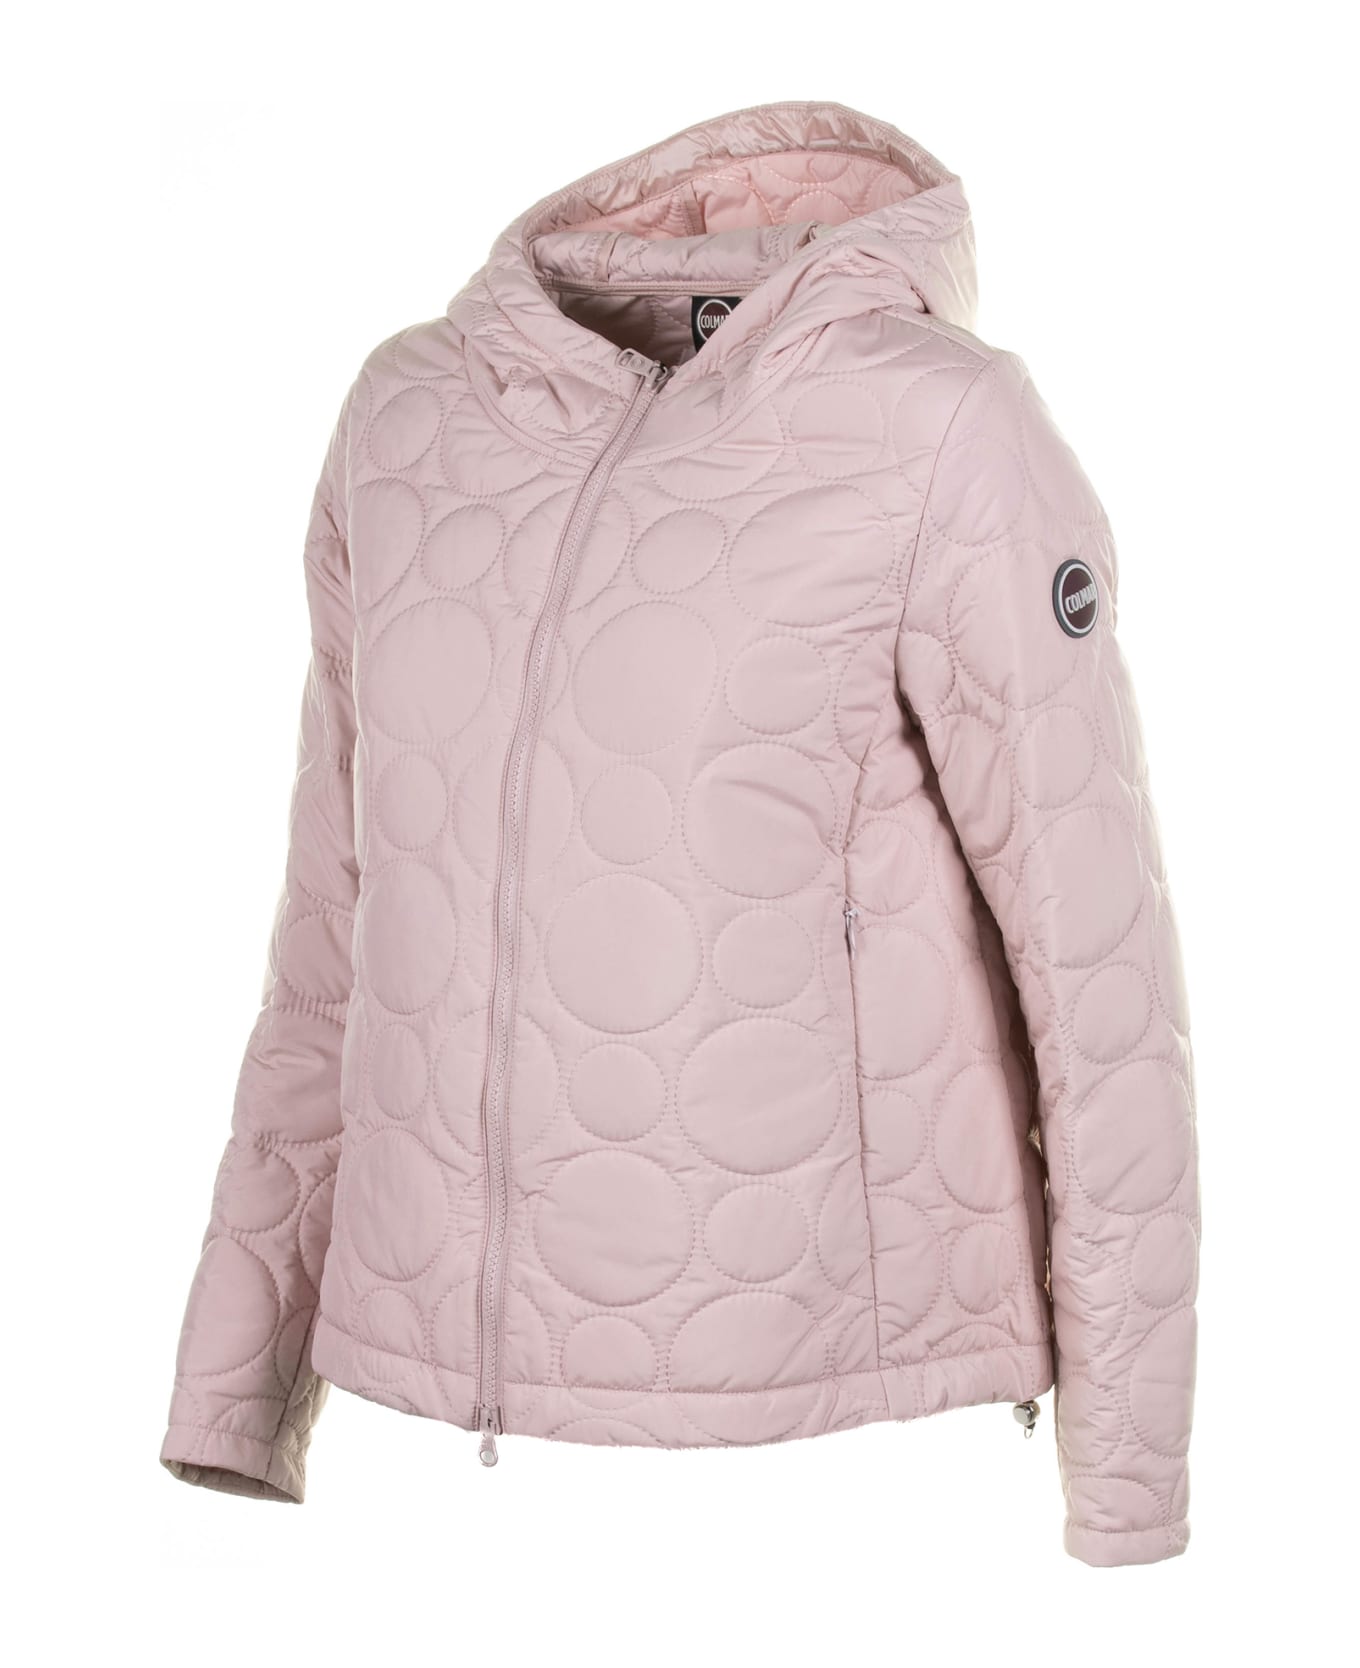 Colmar Pink Quilted Cape With Zip And Hood - CIPRIA ジャケット